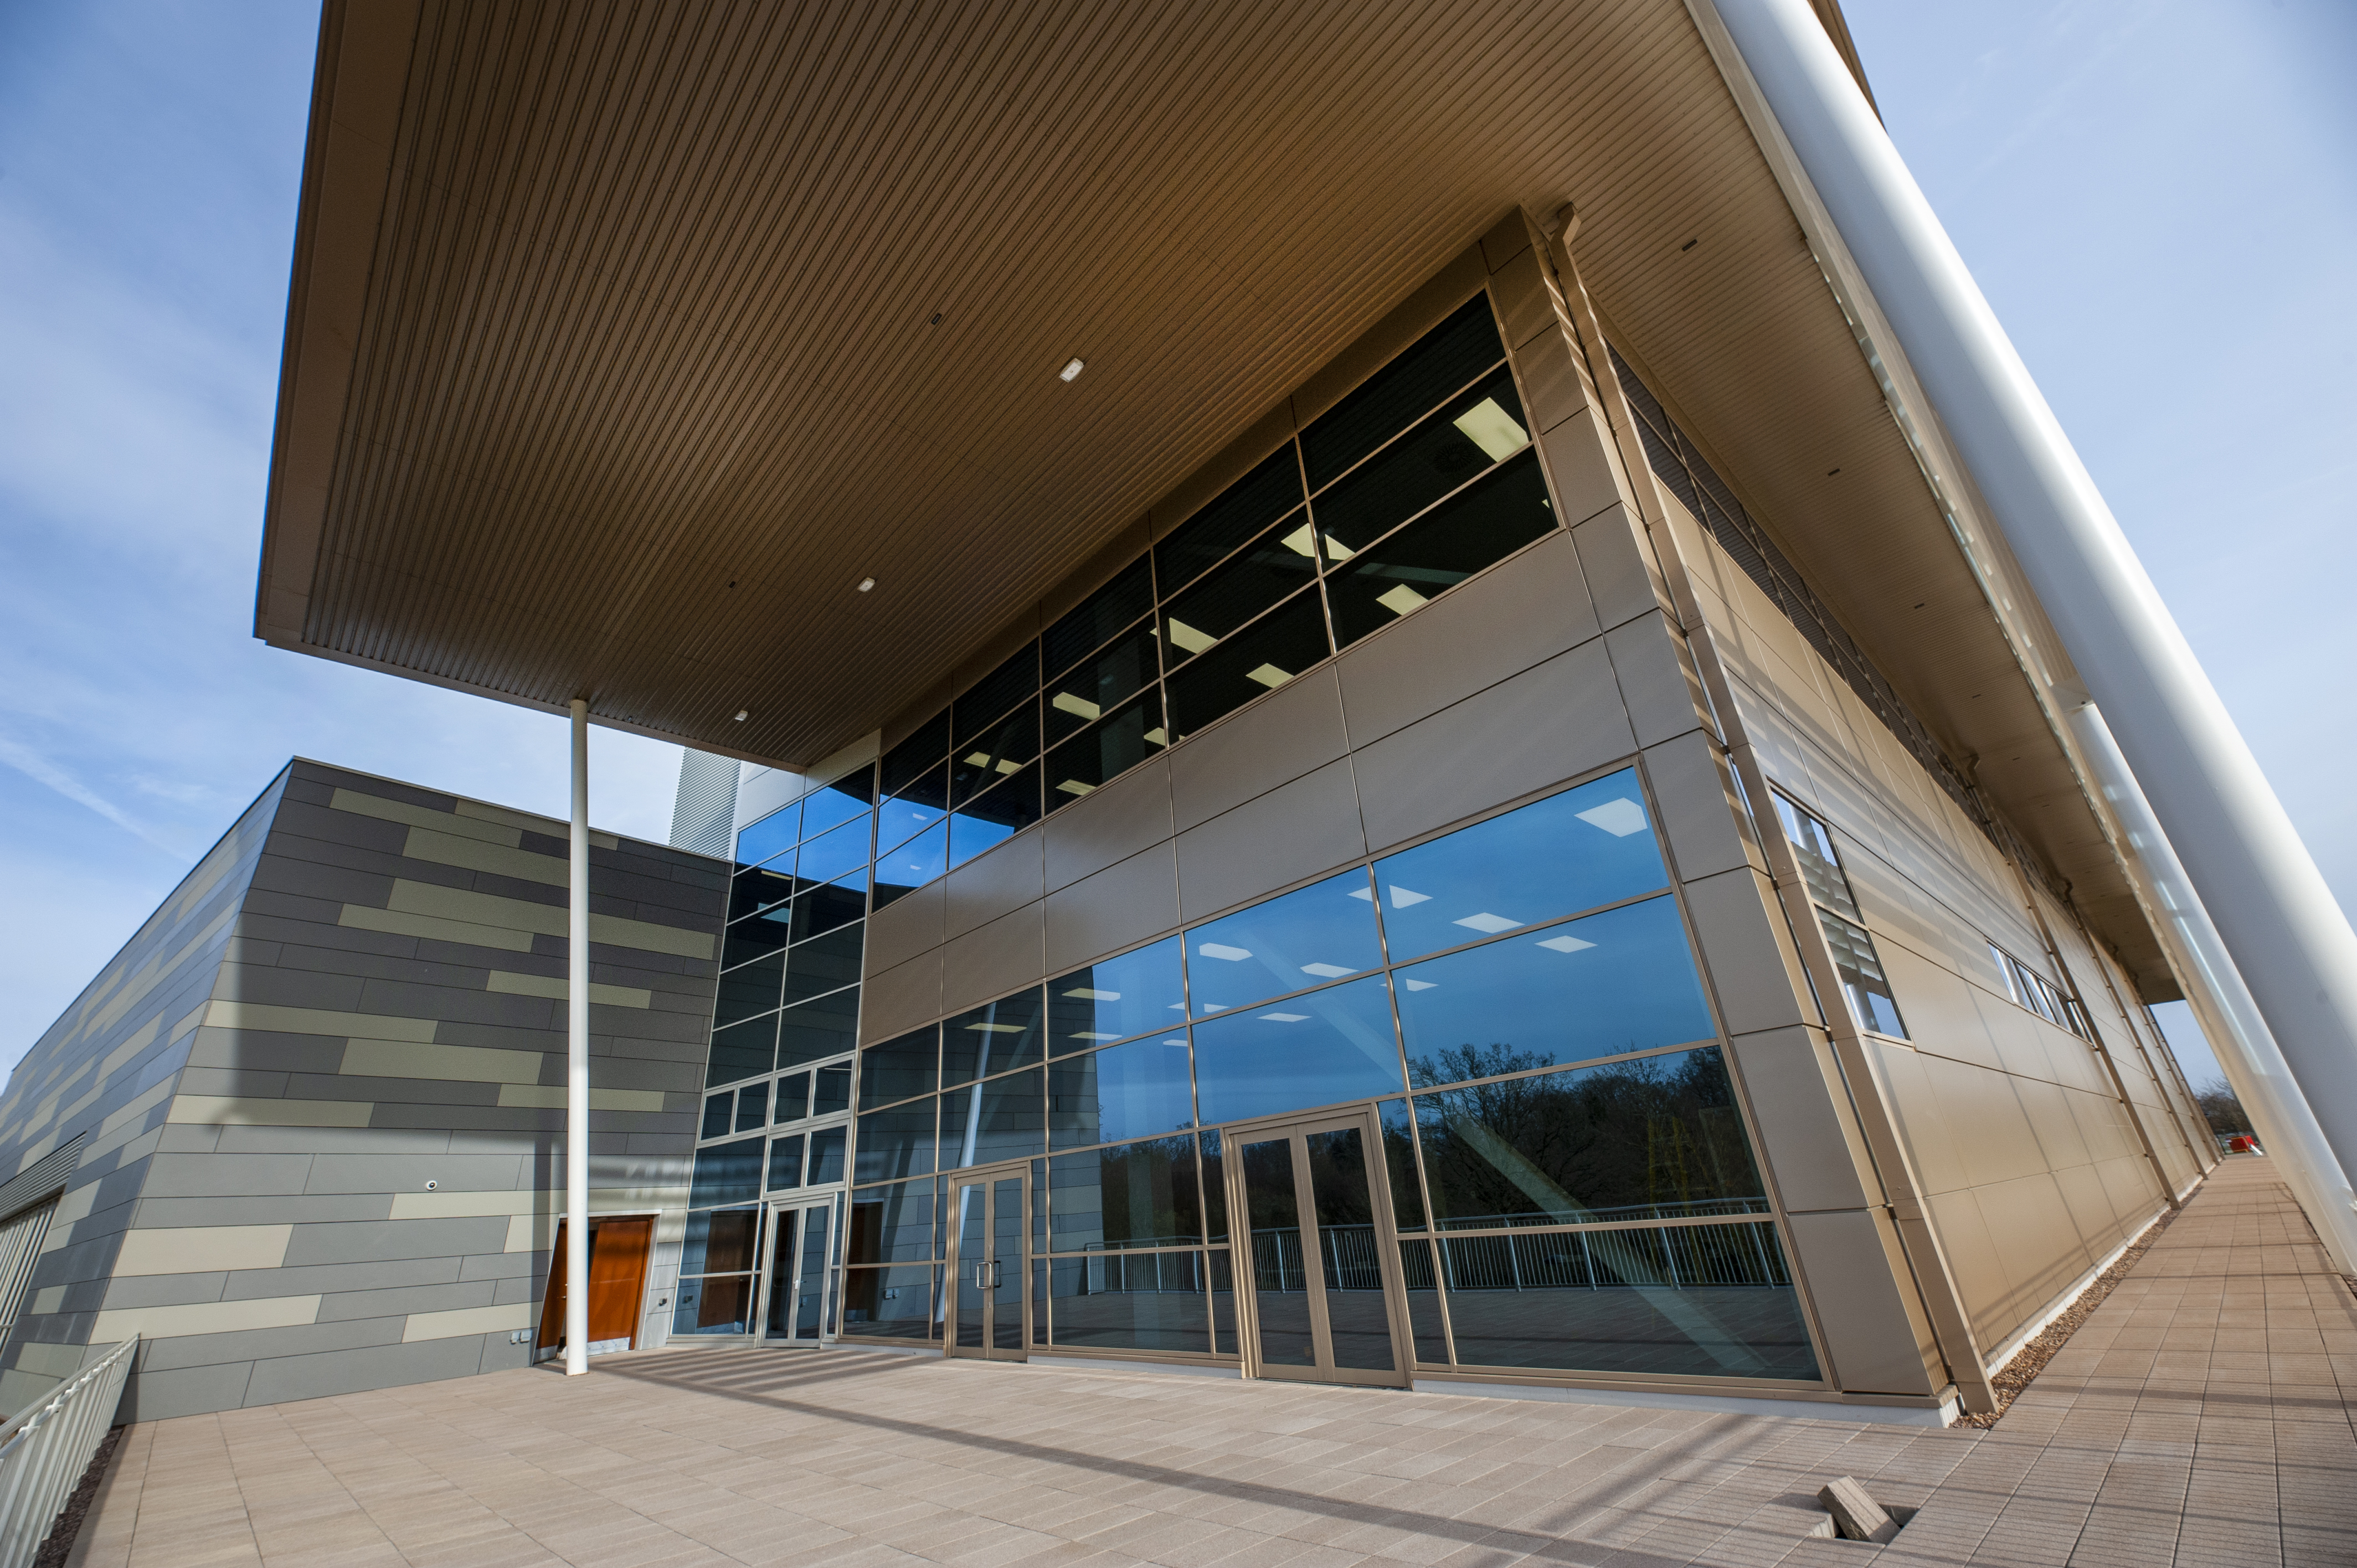 Waterloo delivers fresh air to new £50m sports hub at the University of Warwick